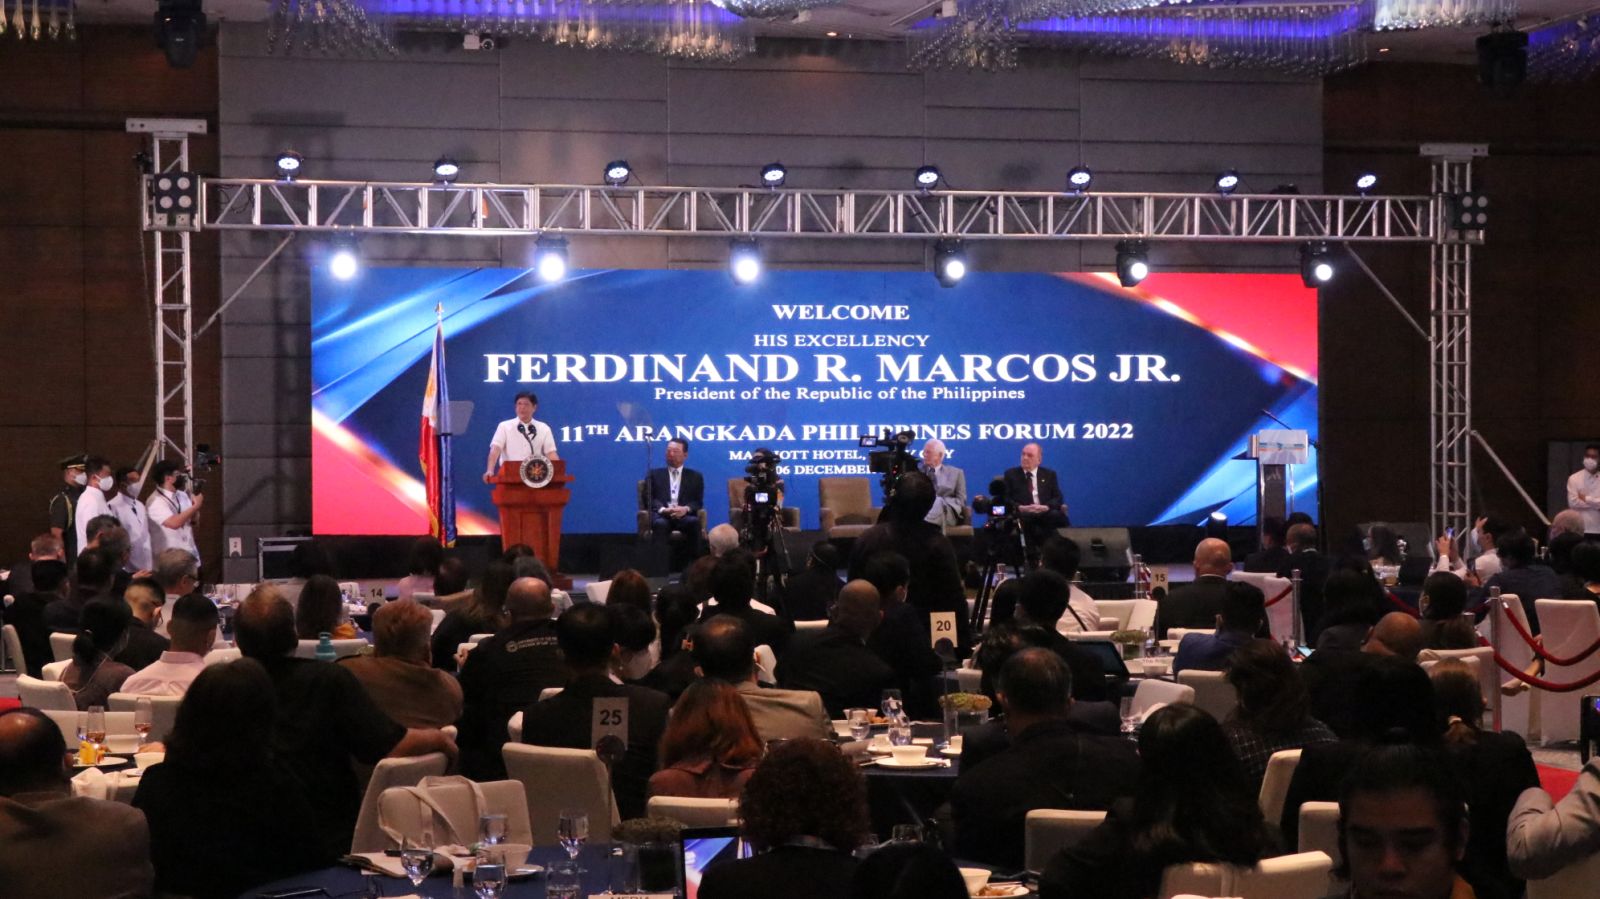 President Ferdinand R. Marcos Jr. meets Joint Foreign Chambers of the Philippines for the 11th Arangkada Philippines Forum 2022